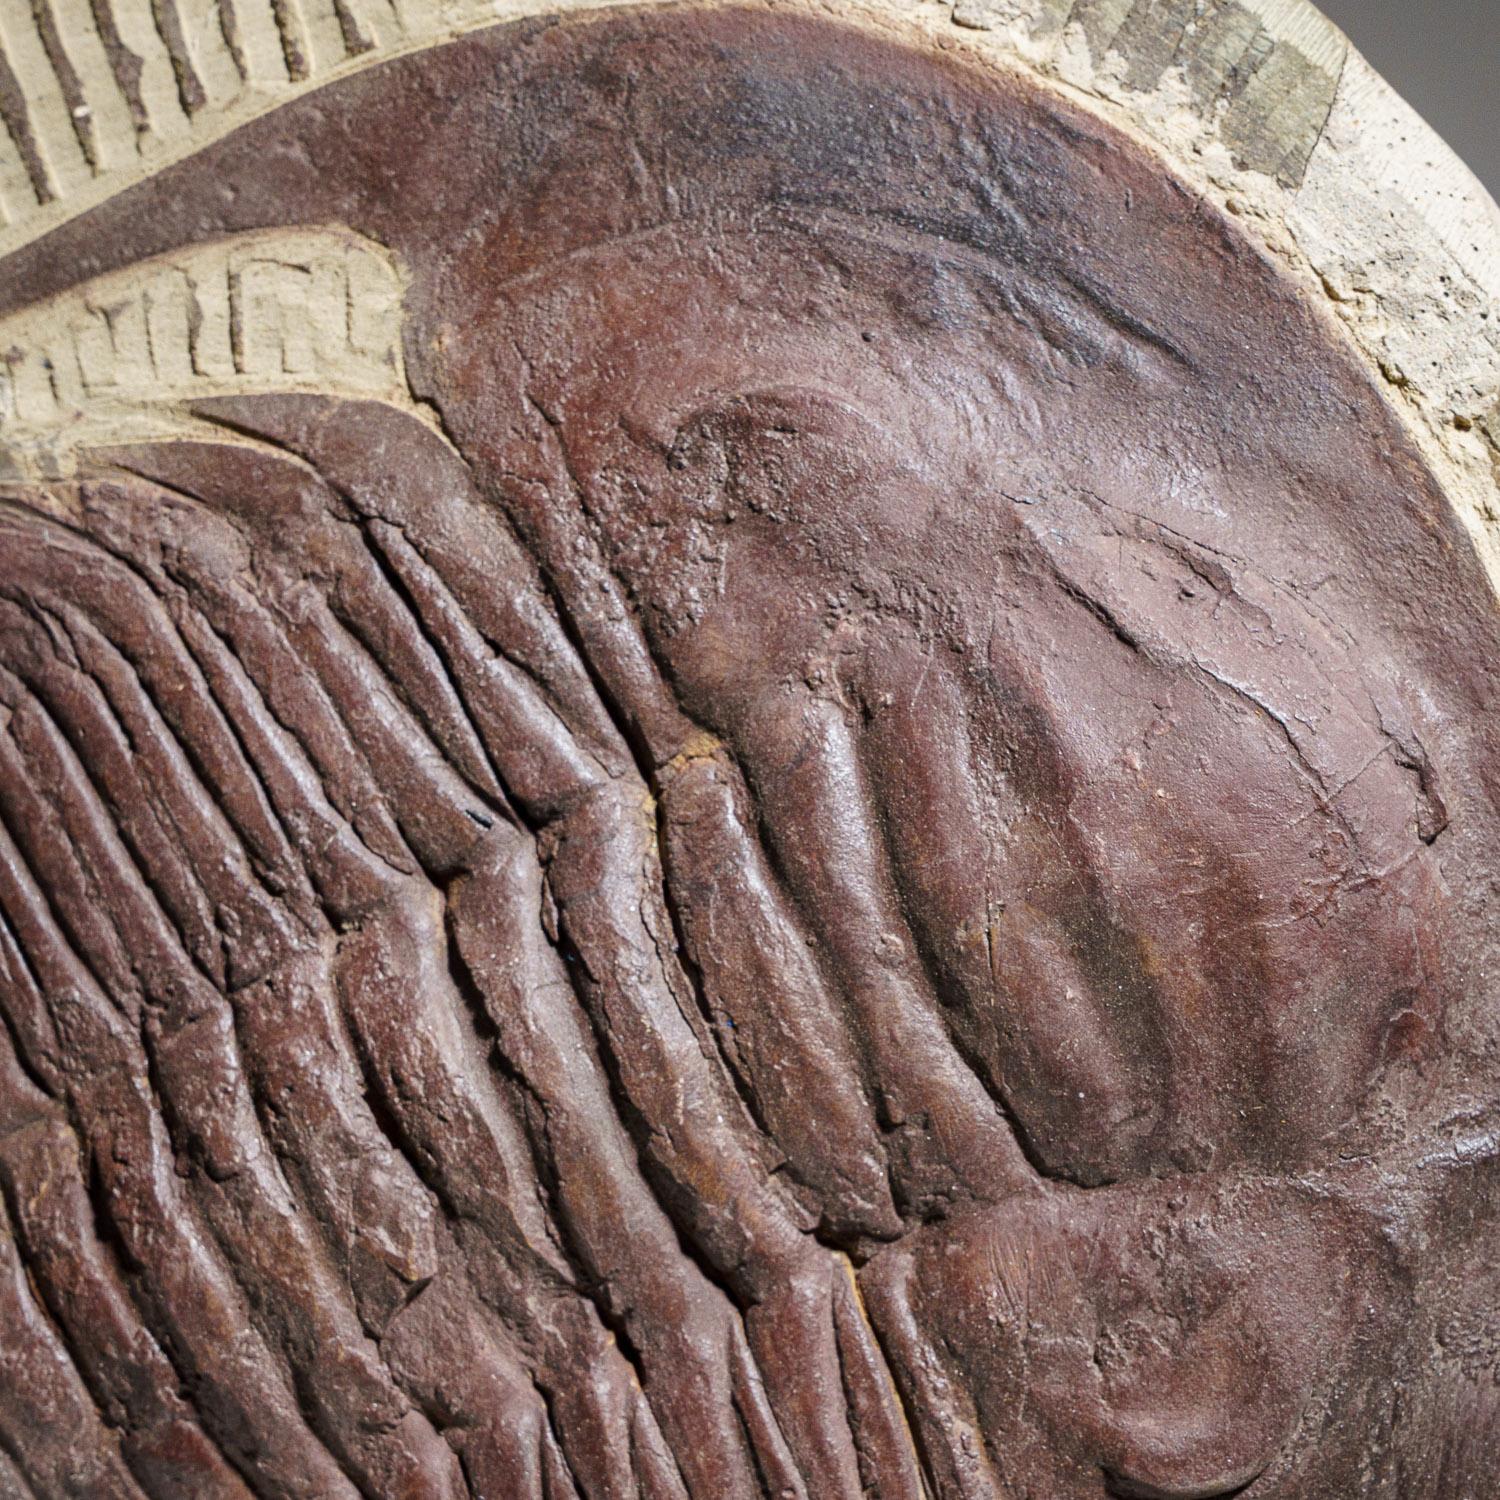 This museum quality, giant Paradoxidae from the Cambrian of Morocco are well-known trilobites for their size and beauty worldwide. The Species in this superfamily can be average to very large, are relatively flat, have an inverted egg-shaped